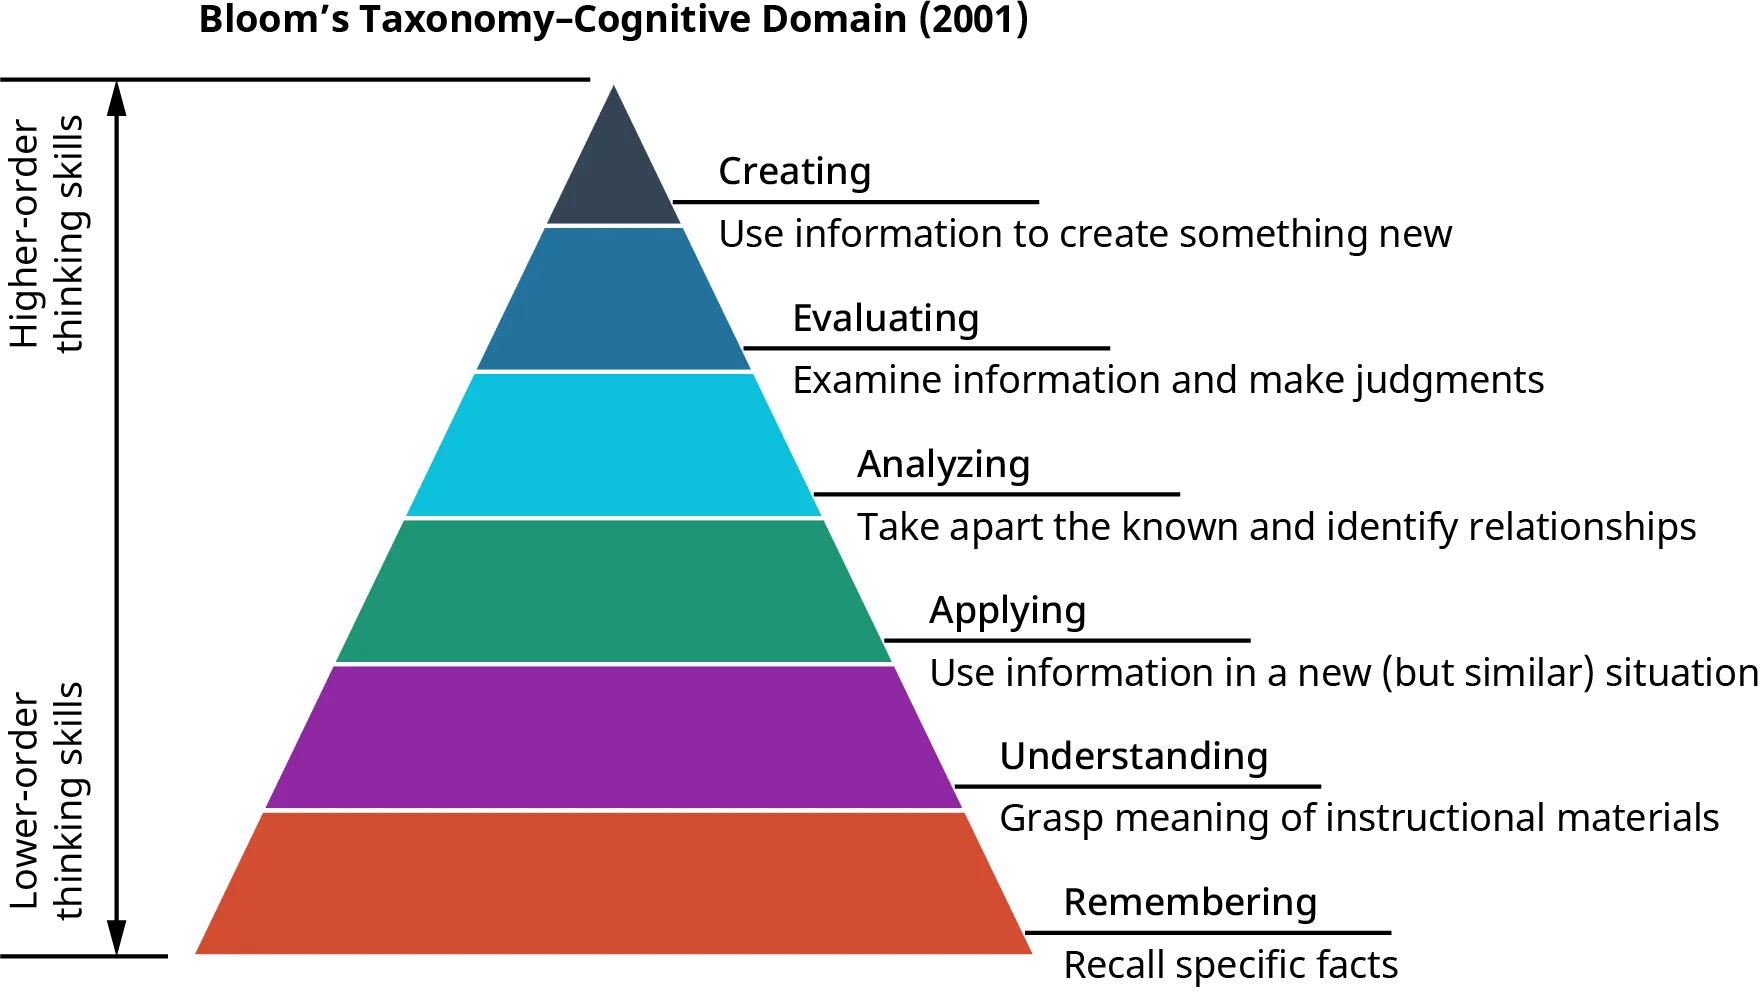 A shape is divided into six portions. Toward the bottom are “Lower Order Thinking Skills,” and toward the top are Higher Order Thinking Skills. From bottom to top, the portions are Remembering, Understanding, Applying, Analyzing, Evaluating, and Creating.